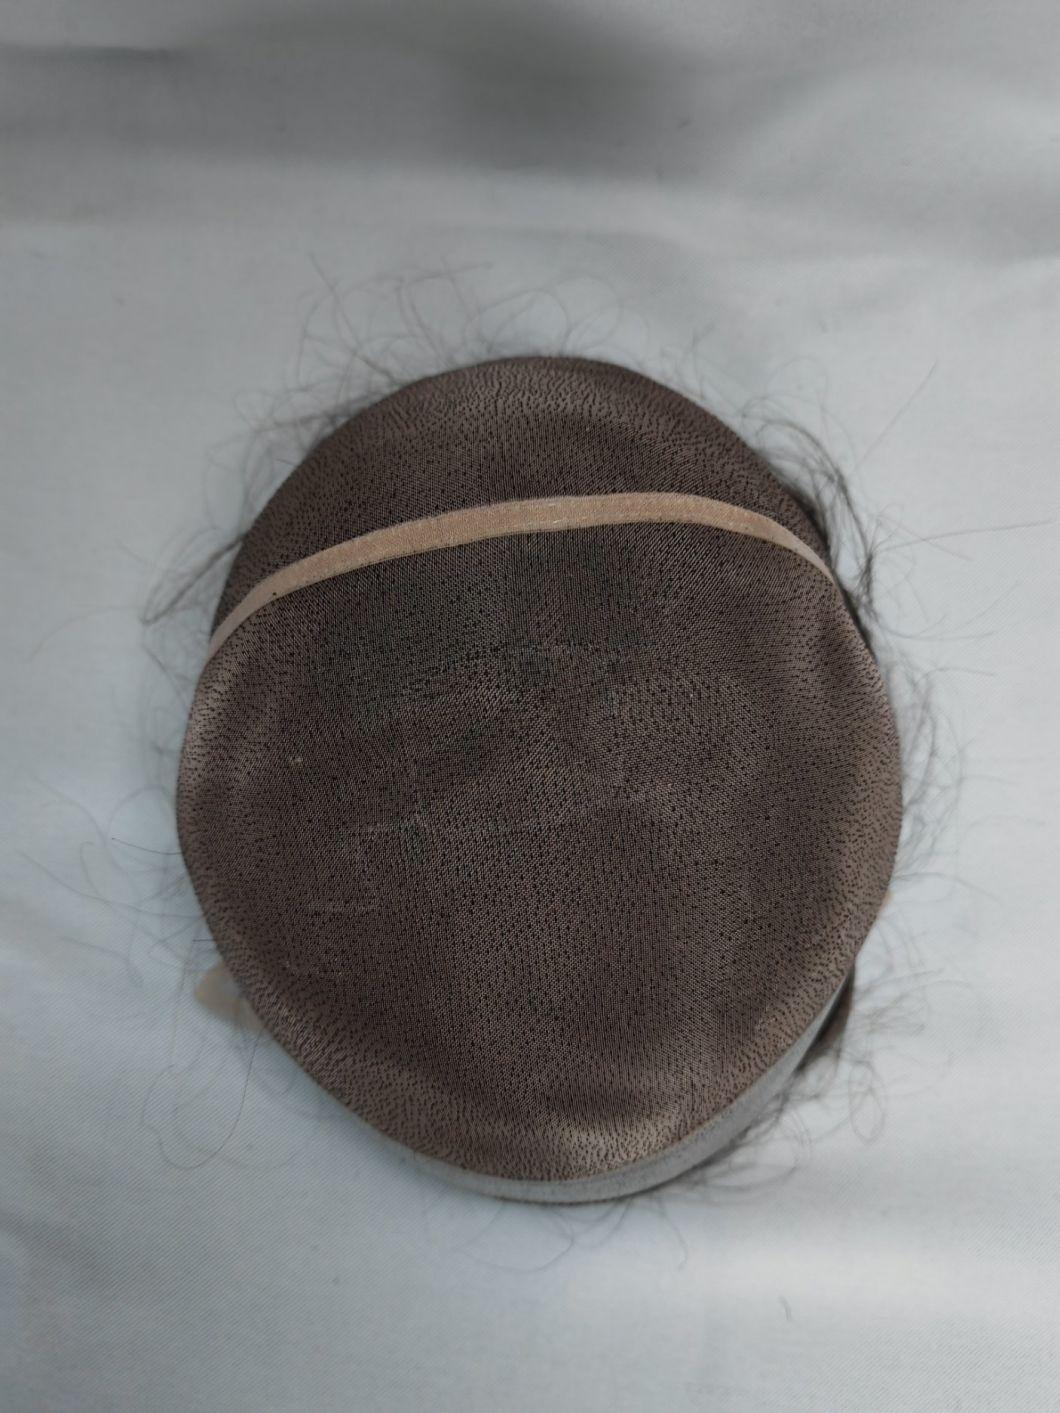 2022 Best Hand Knotted Fine Mono Base Human Hair Toupee Made of Remy Human Hair